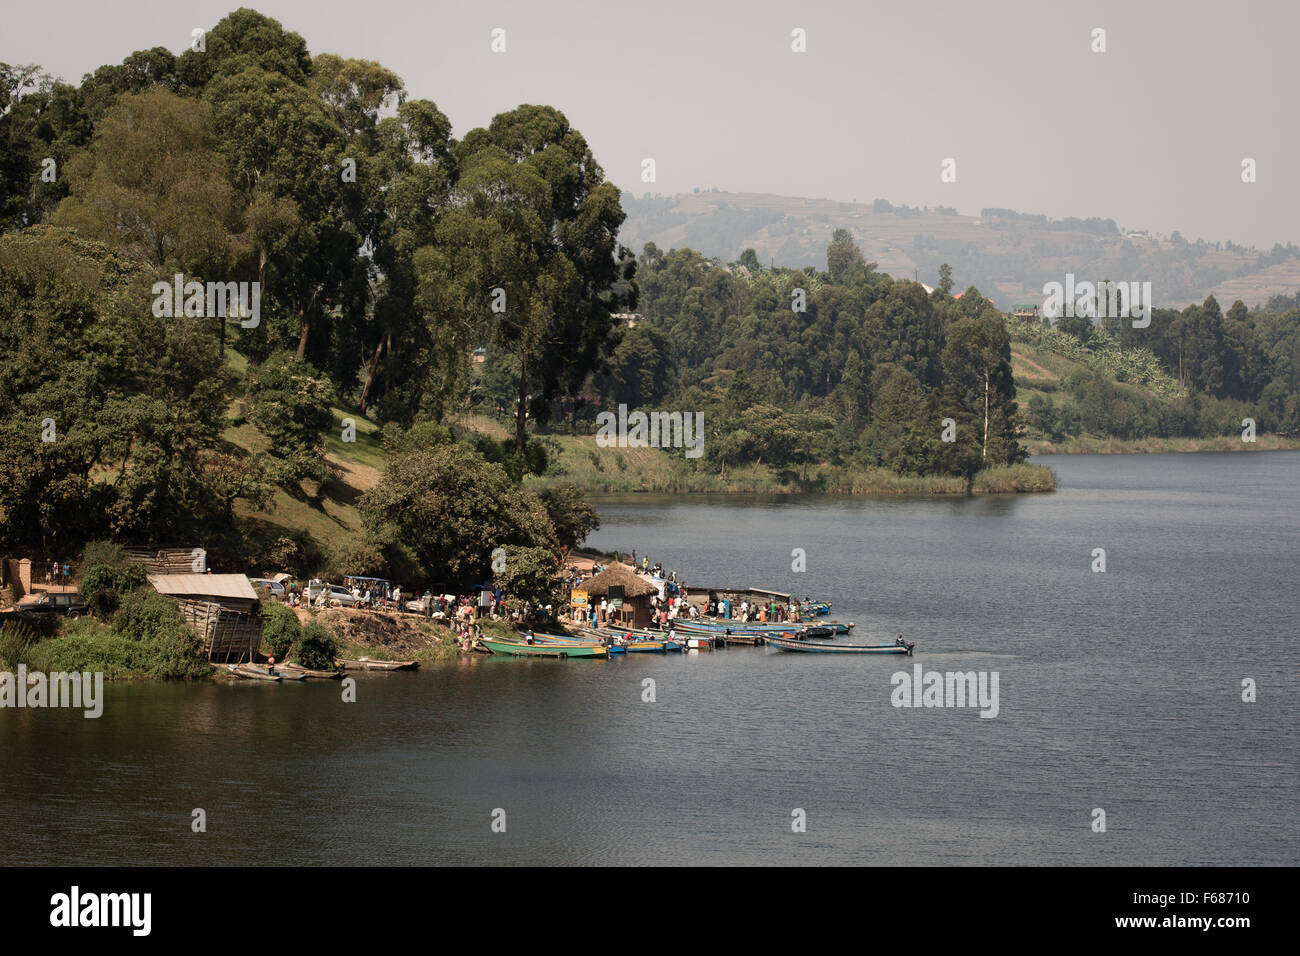 A fisher town at a lake in Uganda Africa with many small fisherboats. Stock Photo